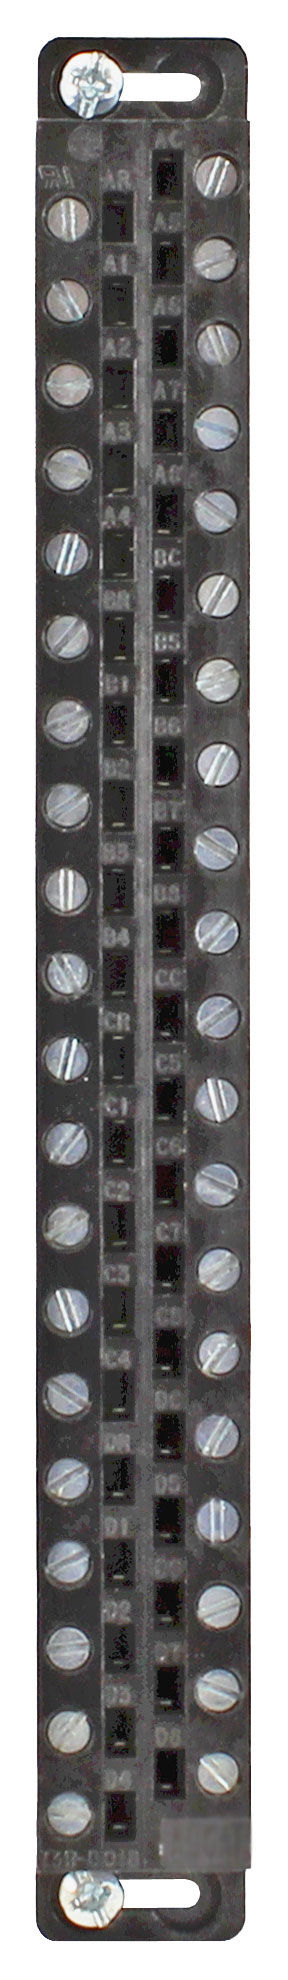 2500-40F 40-Position Standard Screw-Terminal Connector